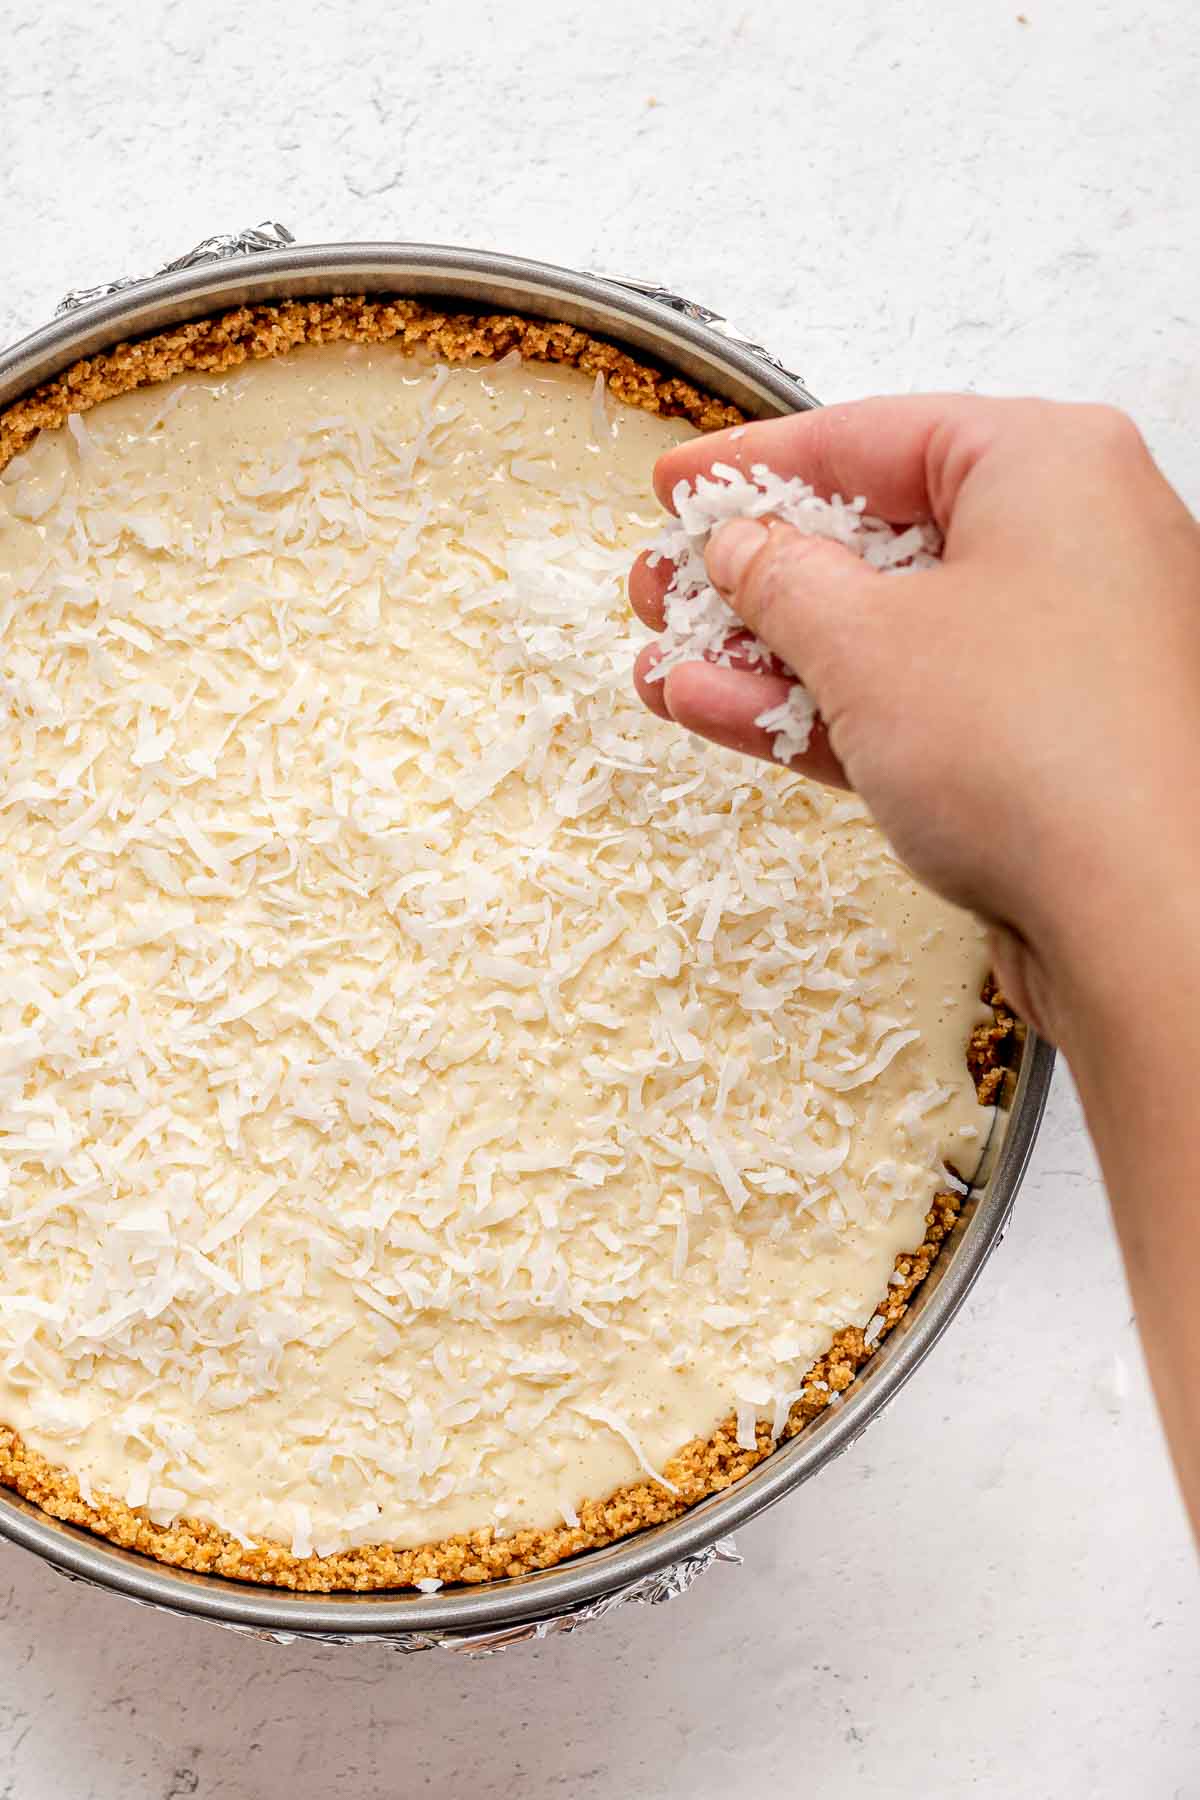 Coconut Cheesecake being topped with coconut